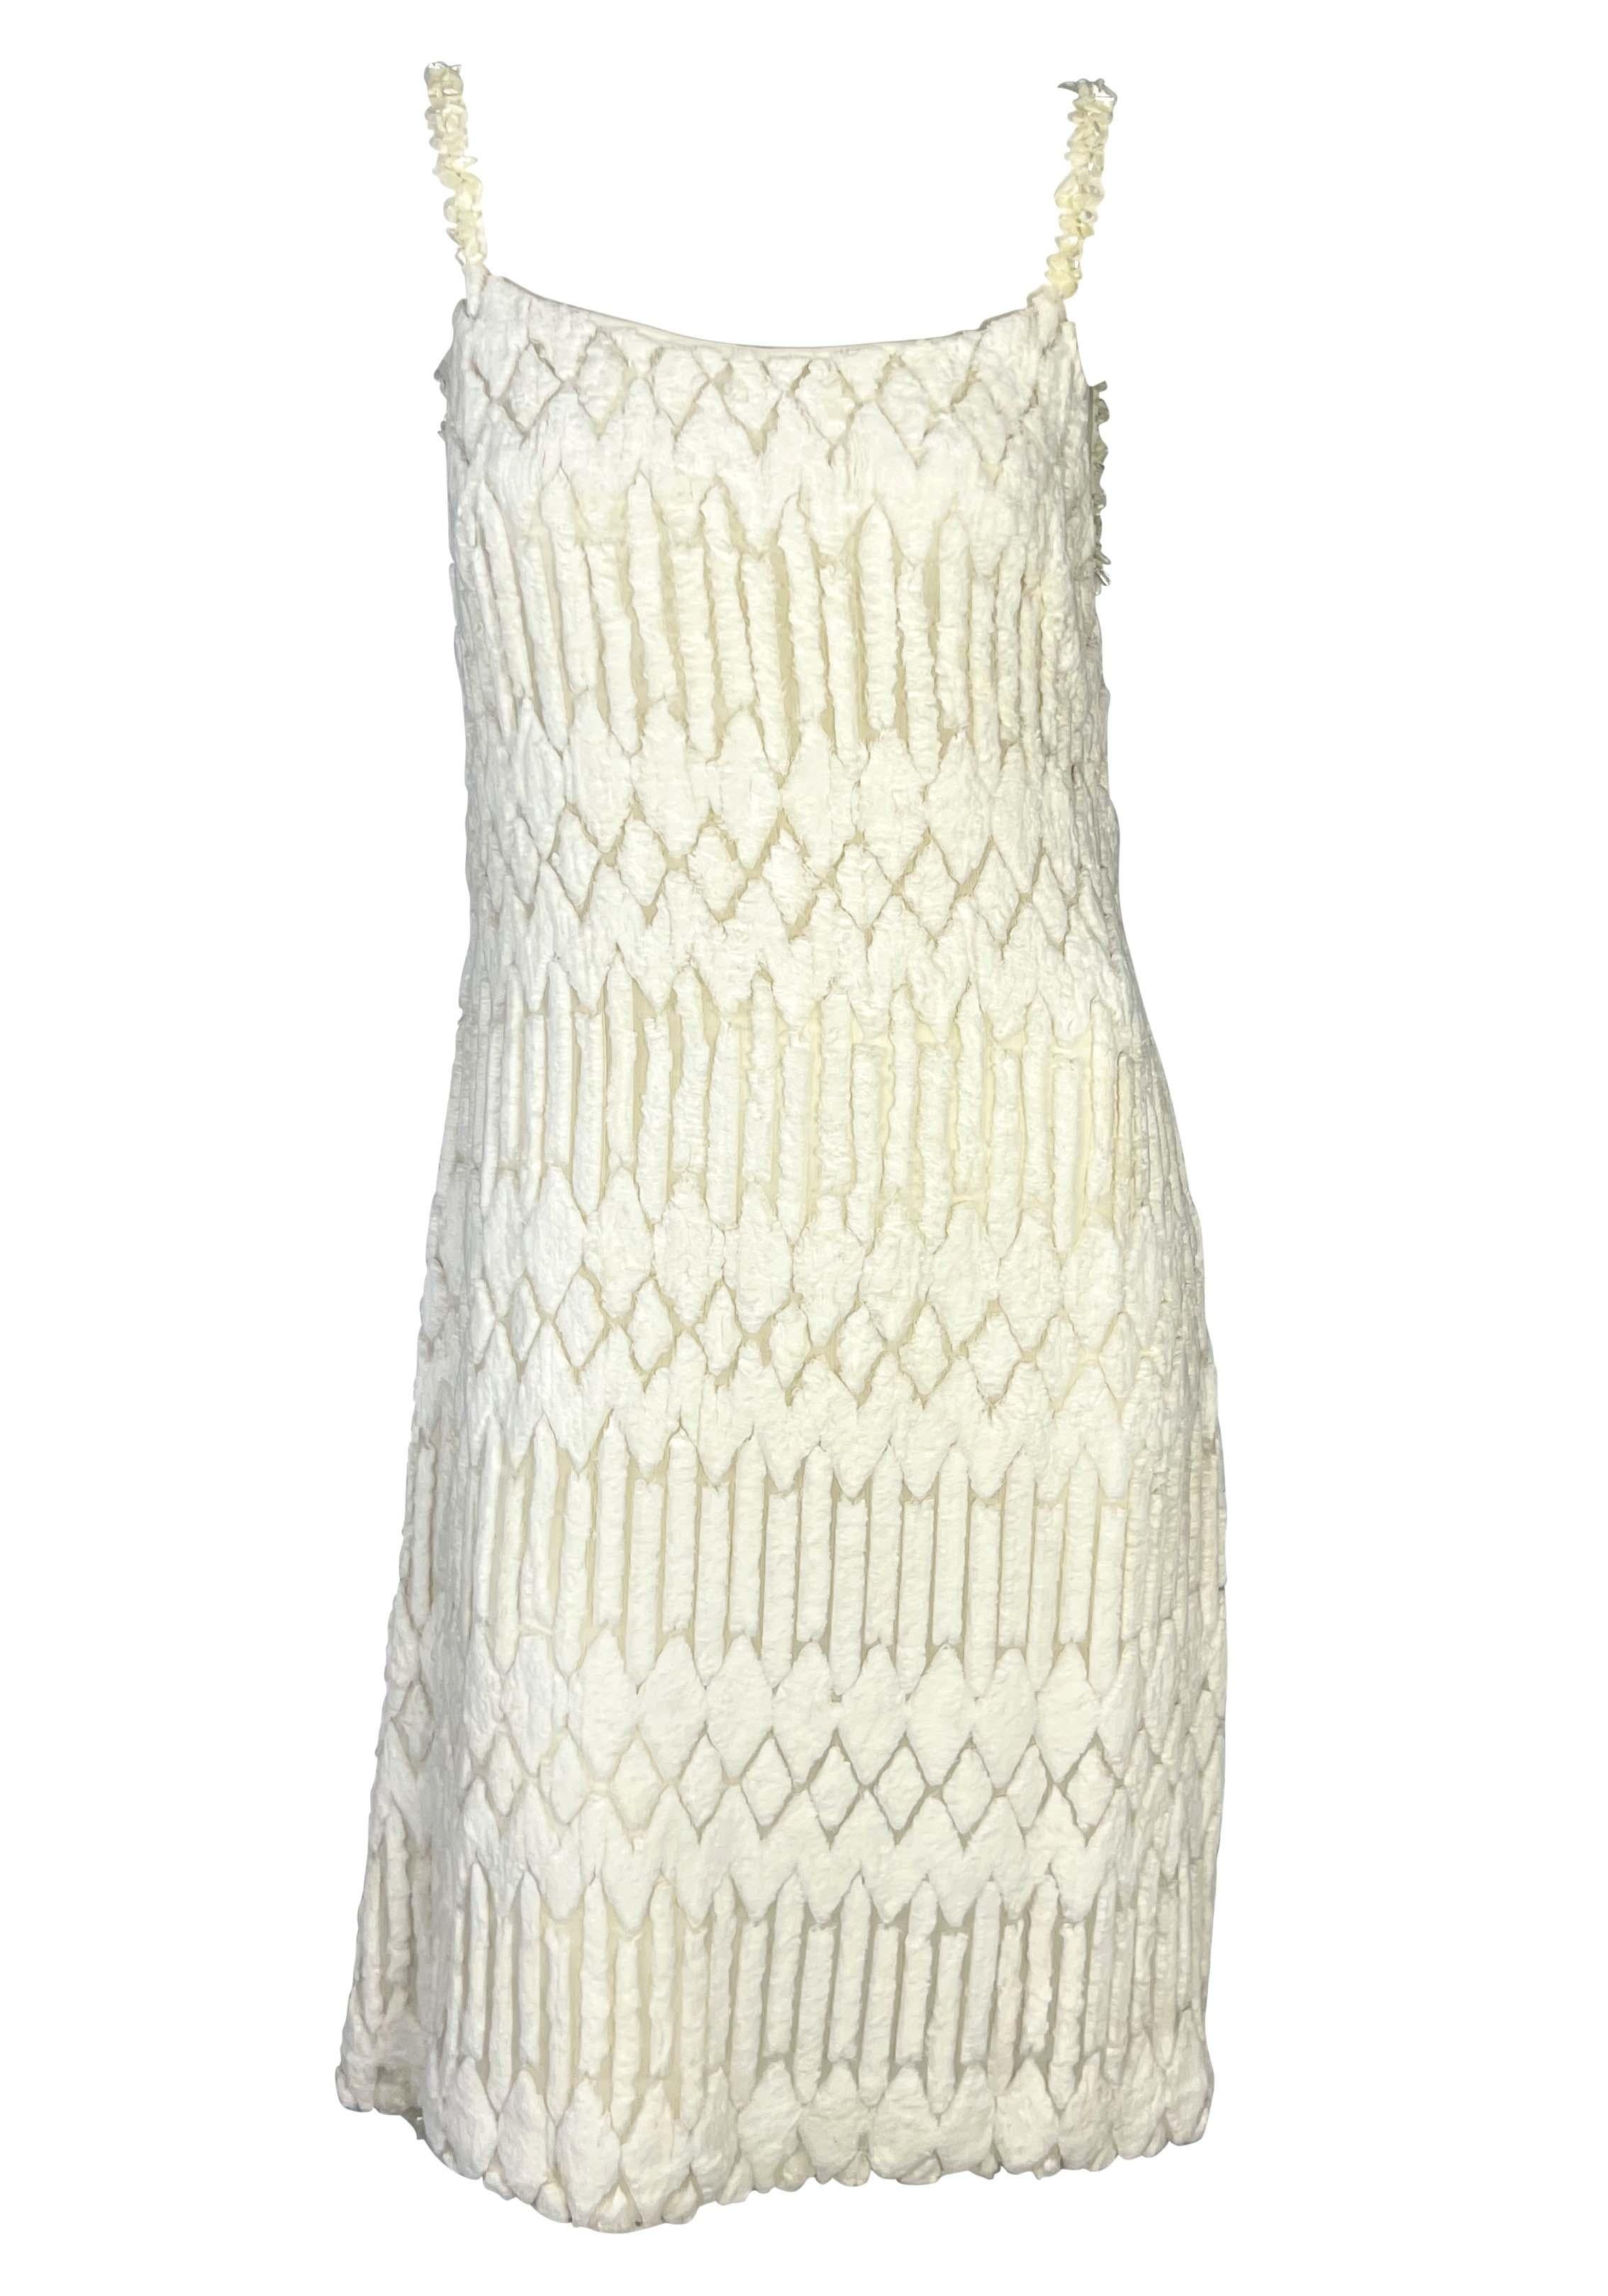 F/W 1999 Gianni Versace by Donatella Runway Sheer White Chenille Beaded Dress For Sale 4